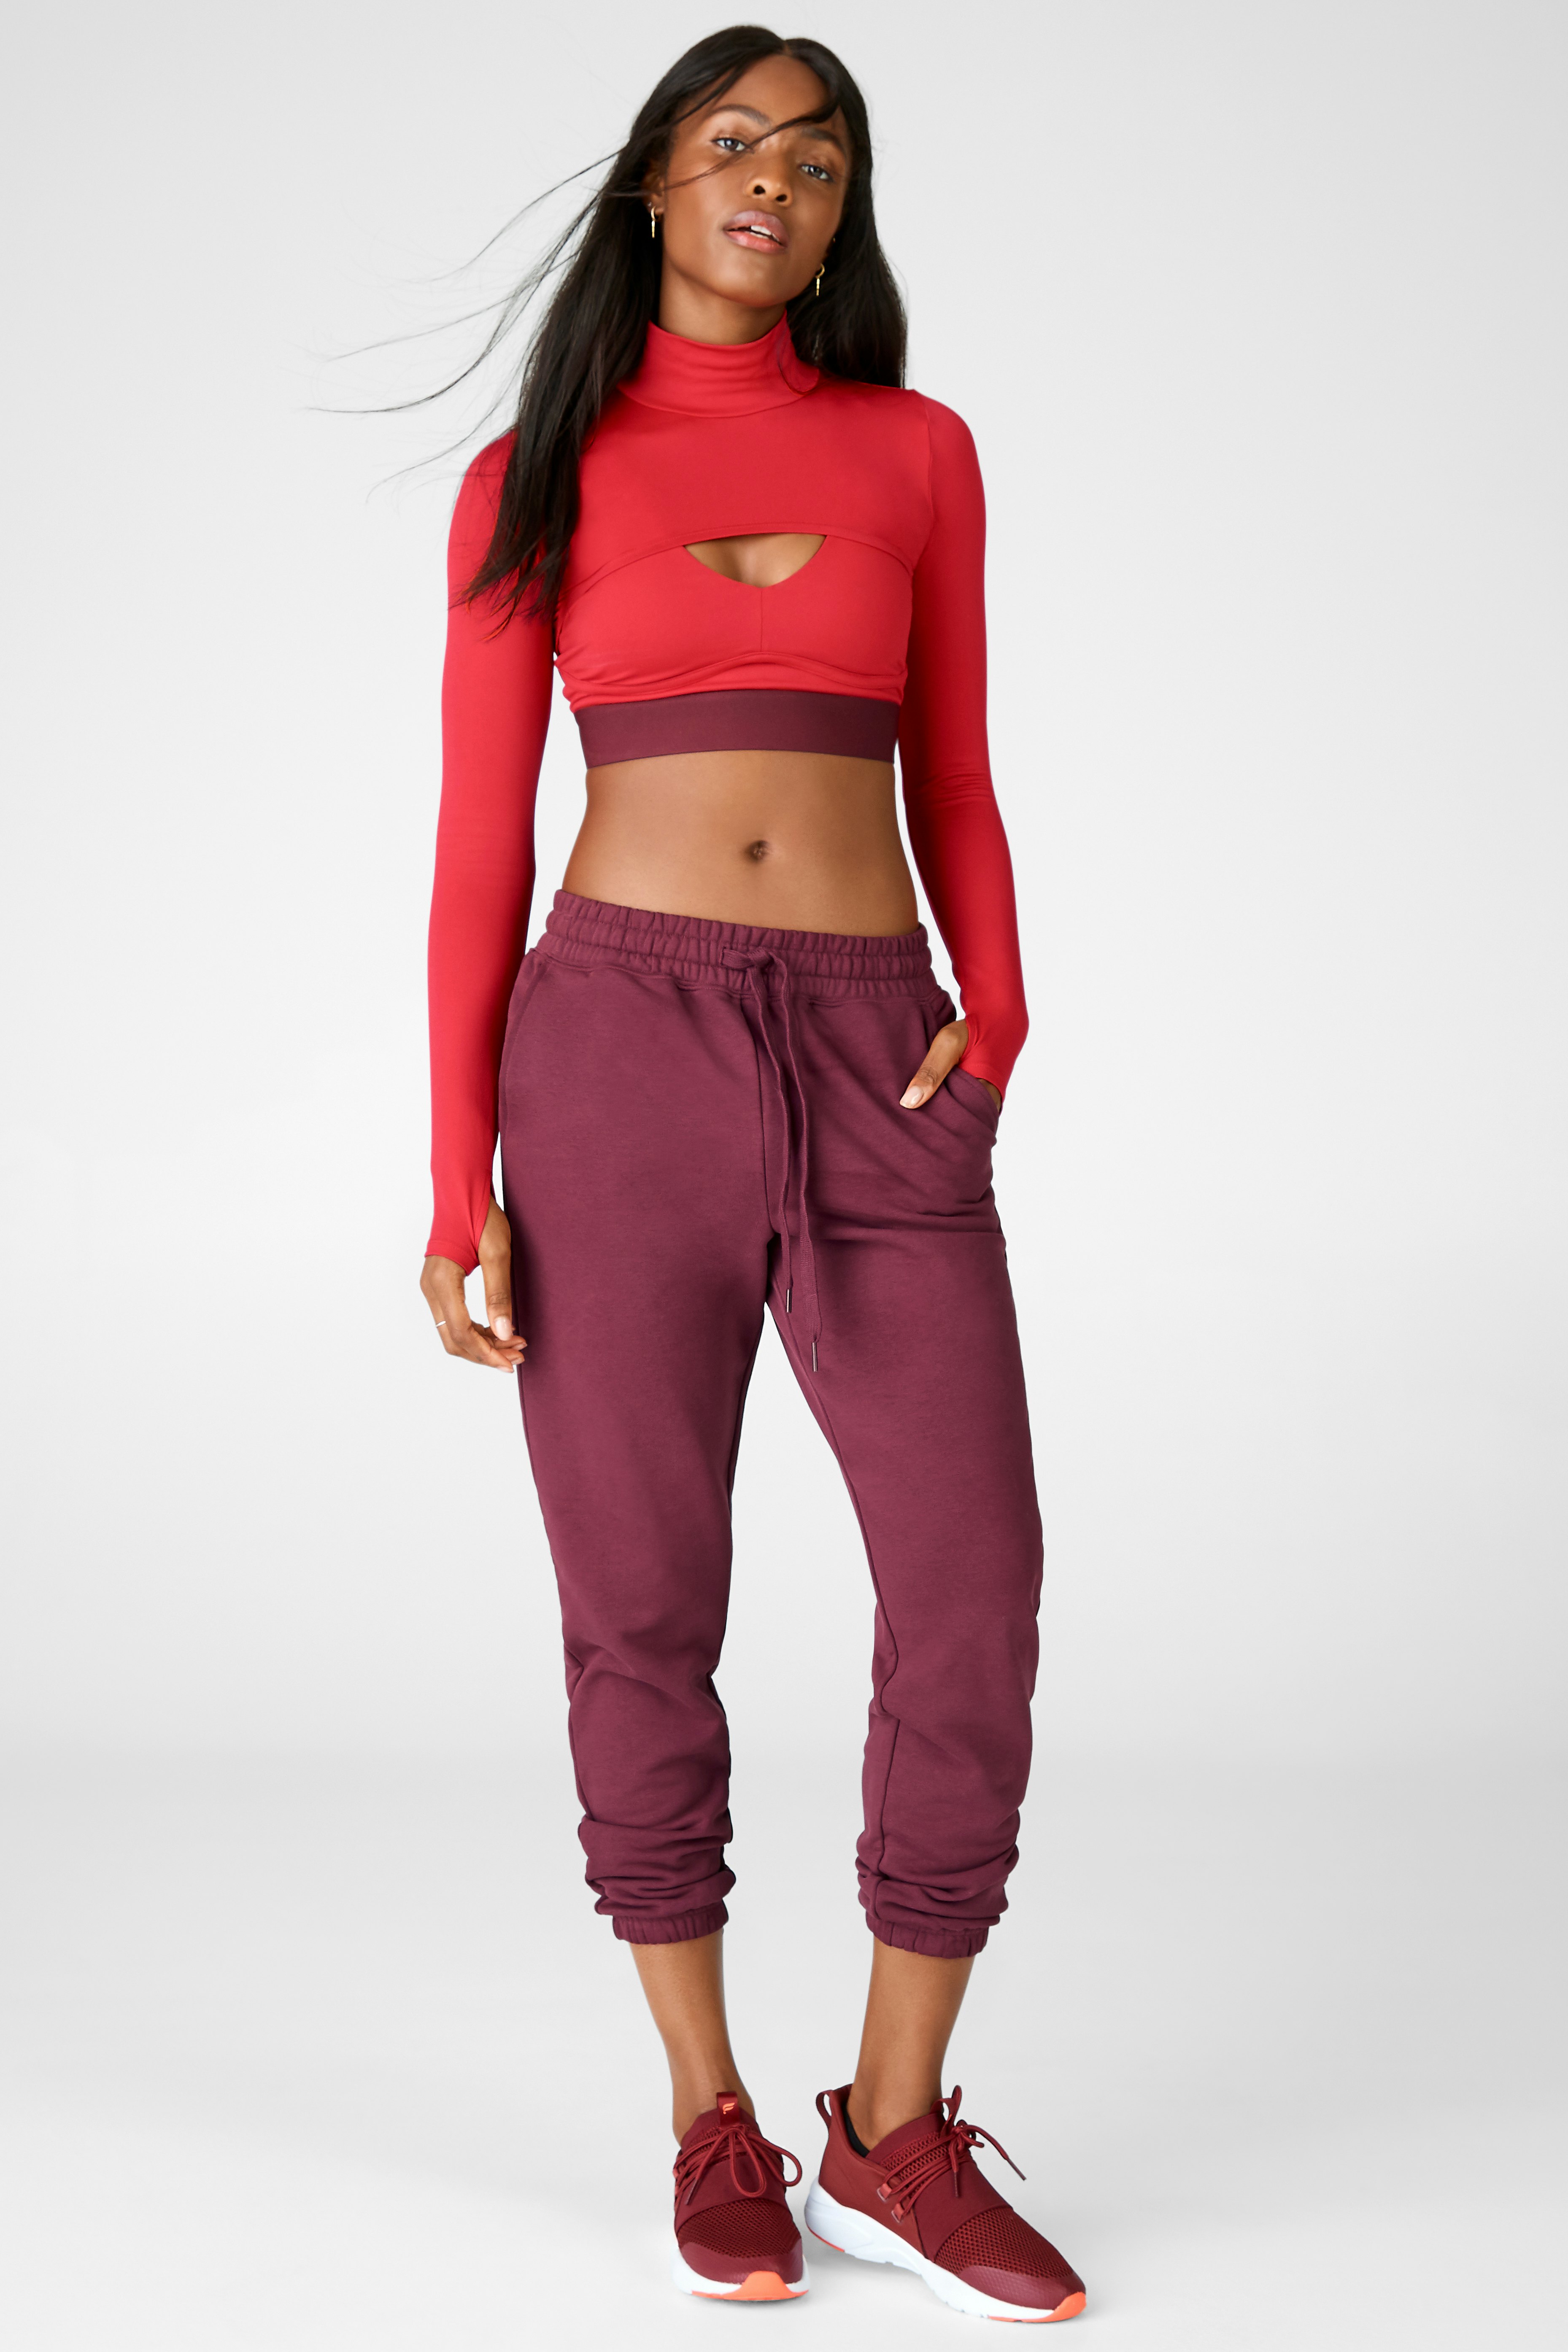 Fabletics Red Hot Two Piece Outfit, Madelaine Petsch Has a New Collection  With Fabletics, and Spoiler Alert: We Want It All